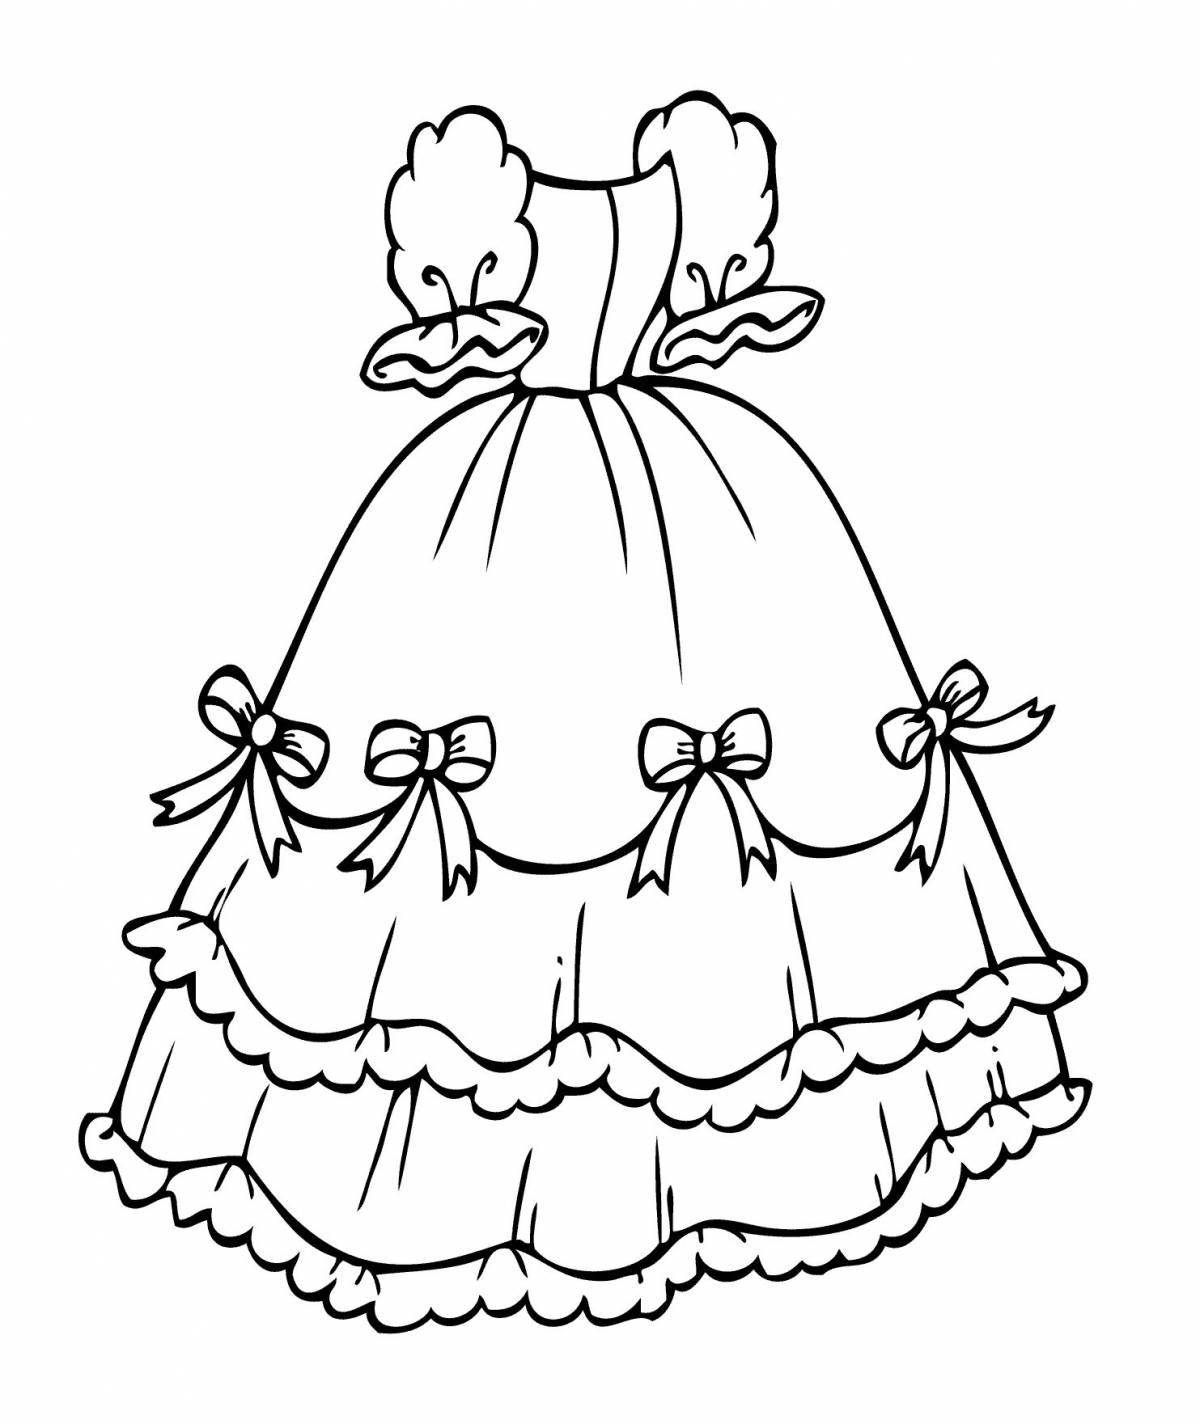 Exquisite coloring dress for 5-6 year olds